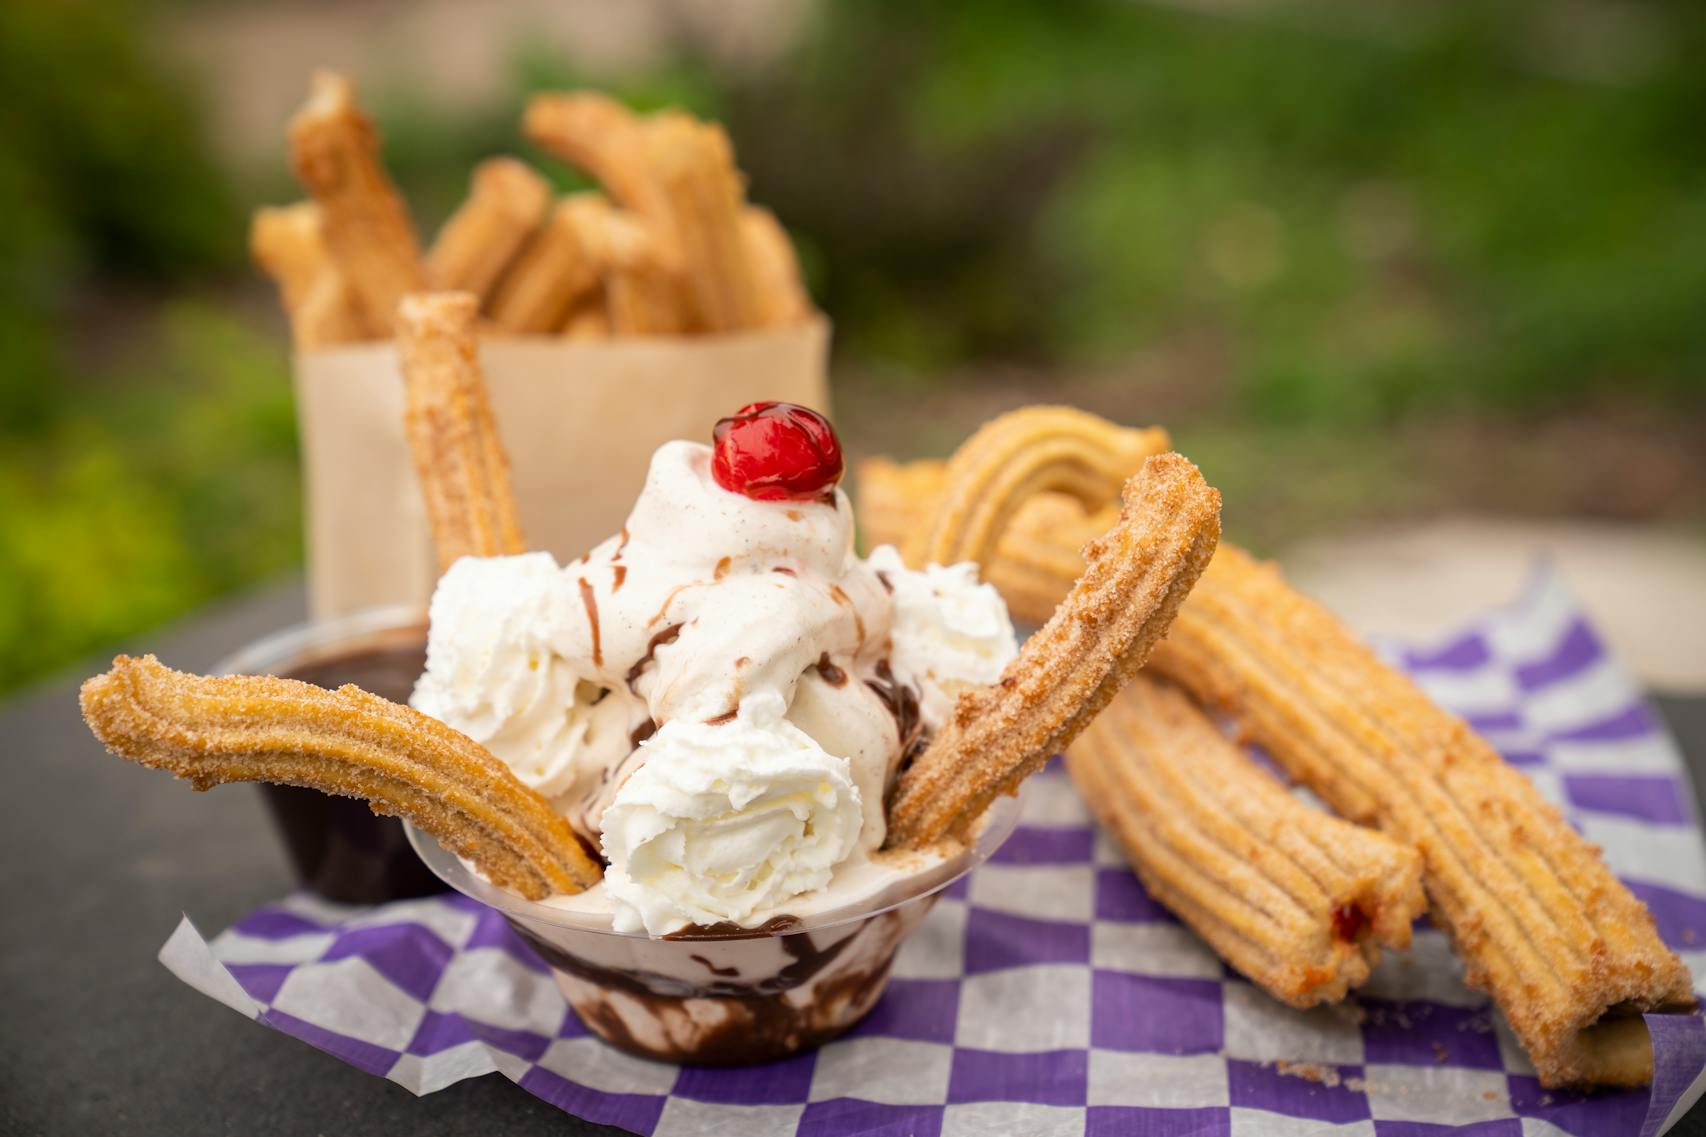 Foods from new vendor Churros & Agua Fresca. The new foods of the 2023 Minnesota State Fair photographed on the first day of the fair in Falcon Heights, Minn. on Tuesday, Aug. 8, 2023. ] LEILA NAVIDI • leila.navidi@startribune.com